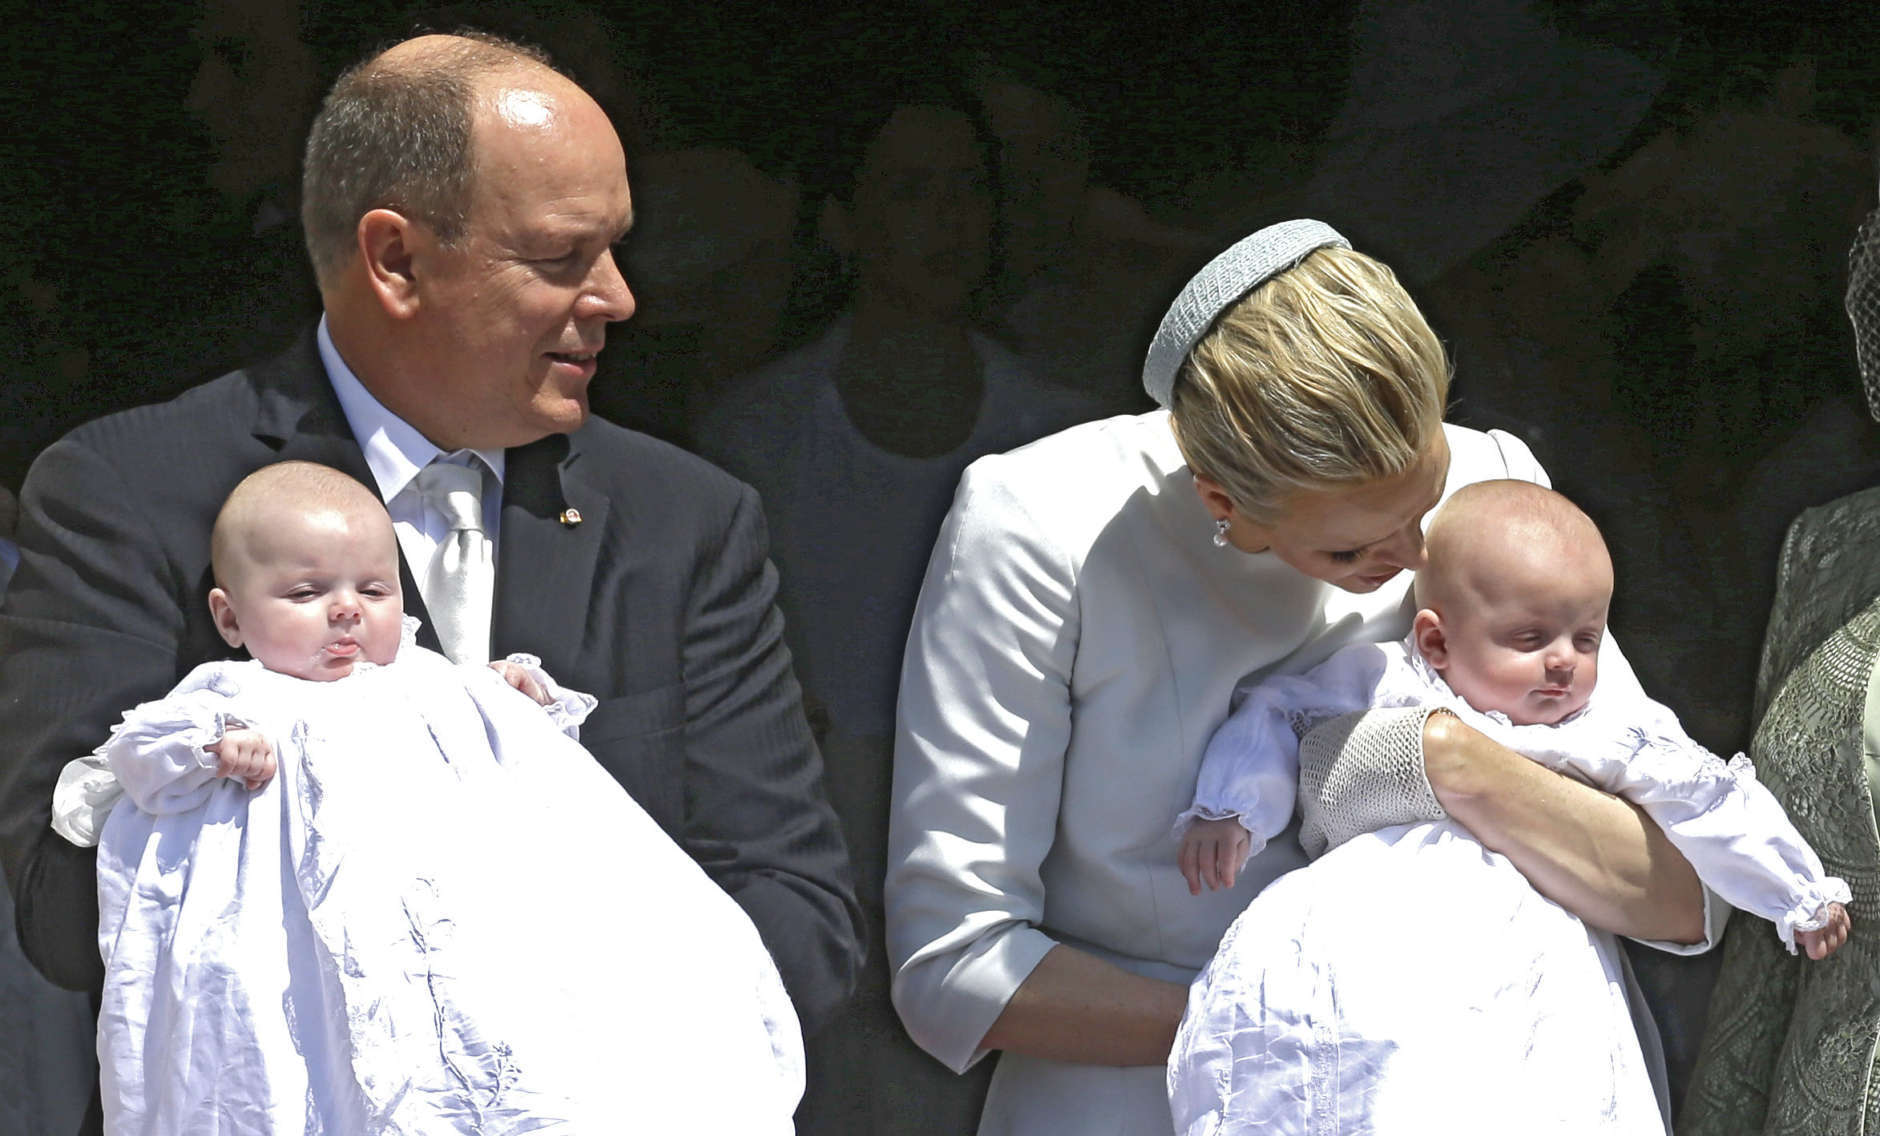 Prince Albert II of Monaco and his wife Princess Charlene pose with their twins babies Princess Gabriella, left, and Prince Jacques, right, after their baptism ceremony in the Cathedral of Monaco, Sunday, May 10, 2015, in Monaco. Monaco's newest royals Prince Jacques Honore Rainier and Princess Gabriella Therese Marie were christened at a ceremony in Monaco on Sunday. Crowds turned out in their thousands to catch a glimpse of the twins and their parents Prince Albert II and Princess Charlene. (AP Photo/Lionel Cironneau)